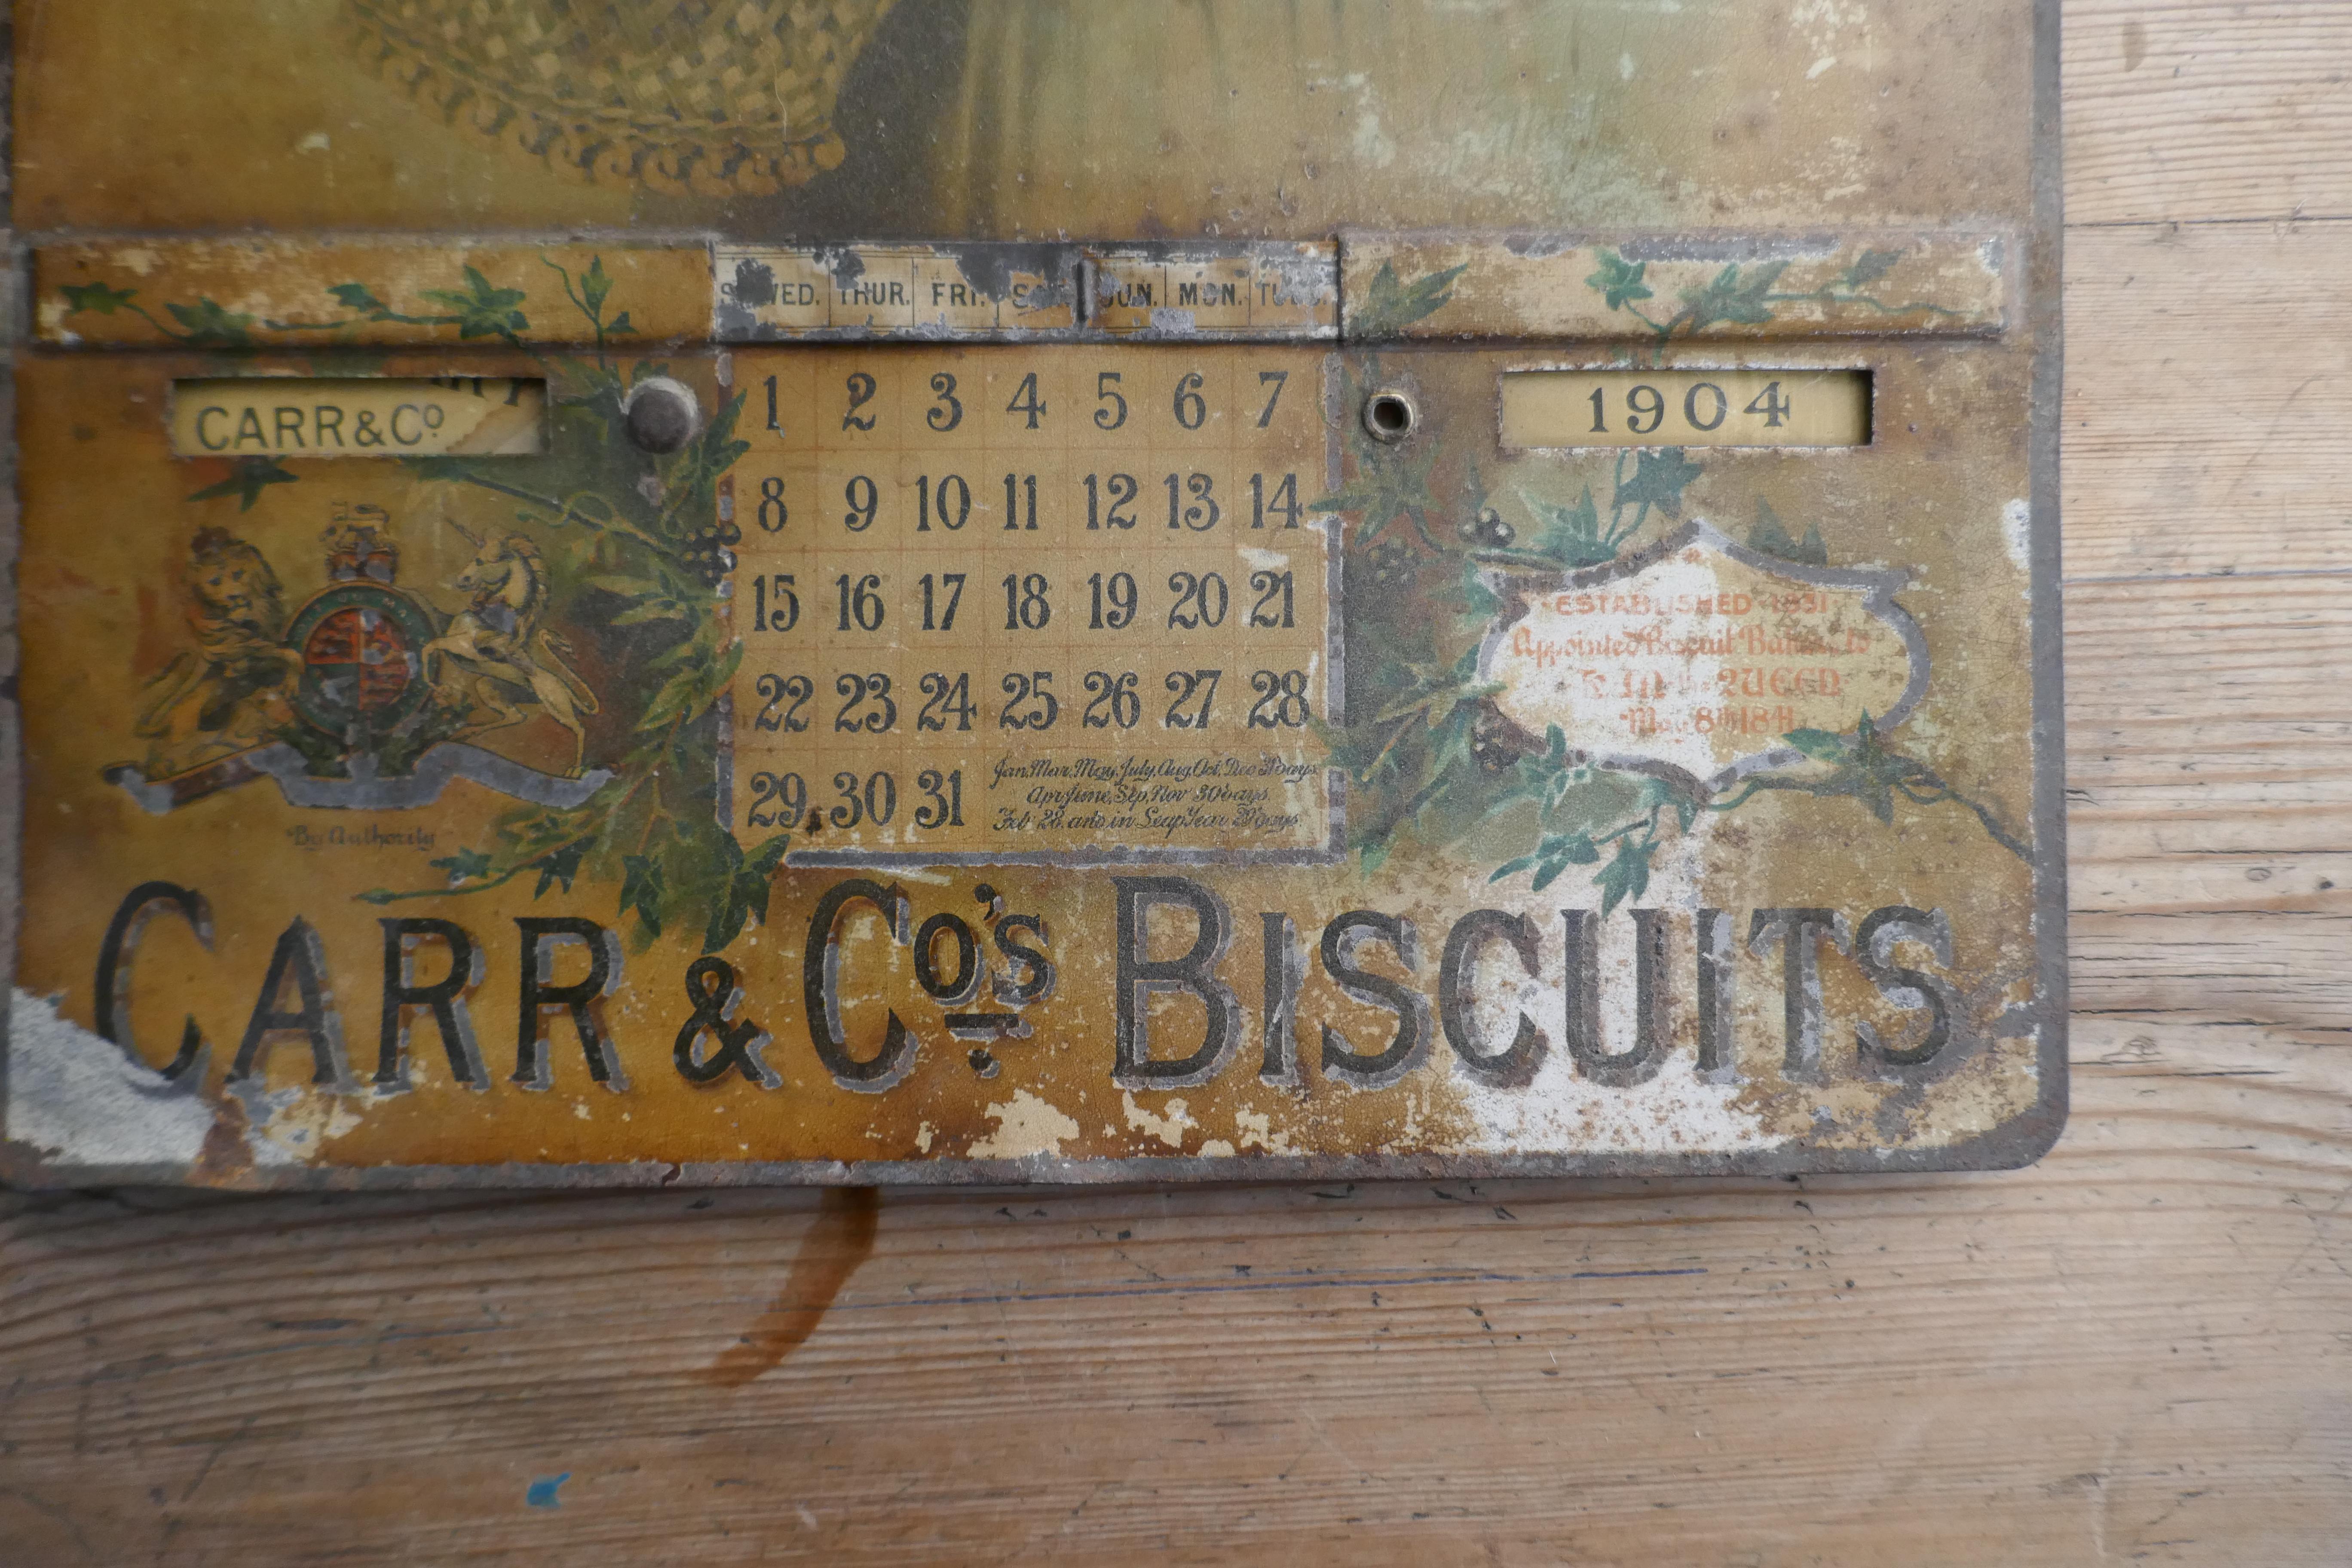 Industrial 19th Century Tin Plate Perpetual Calendar Advertising Carr’s Biscuits, 1893-1904